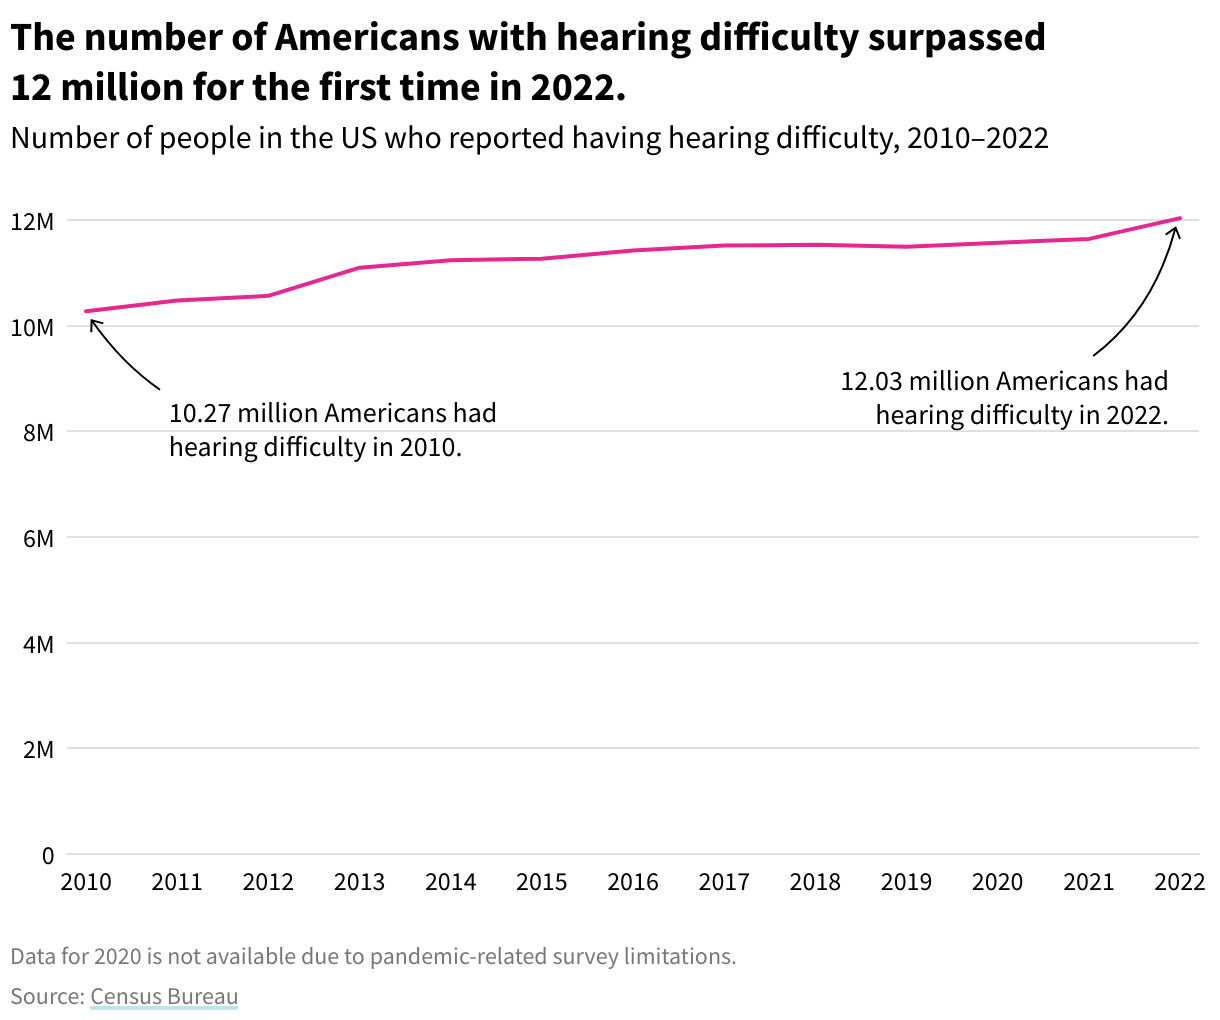 Line graph showing the total number of Americans with a hearing difficulty from 2010-2022. The number of Americans with hearing difficulty crossed 12 million for the first time in 2022.